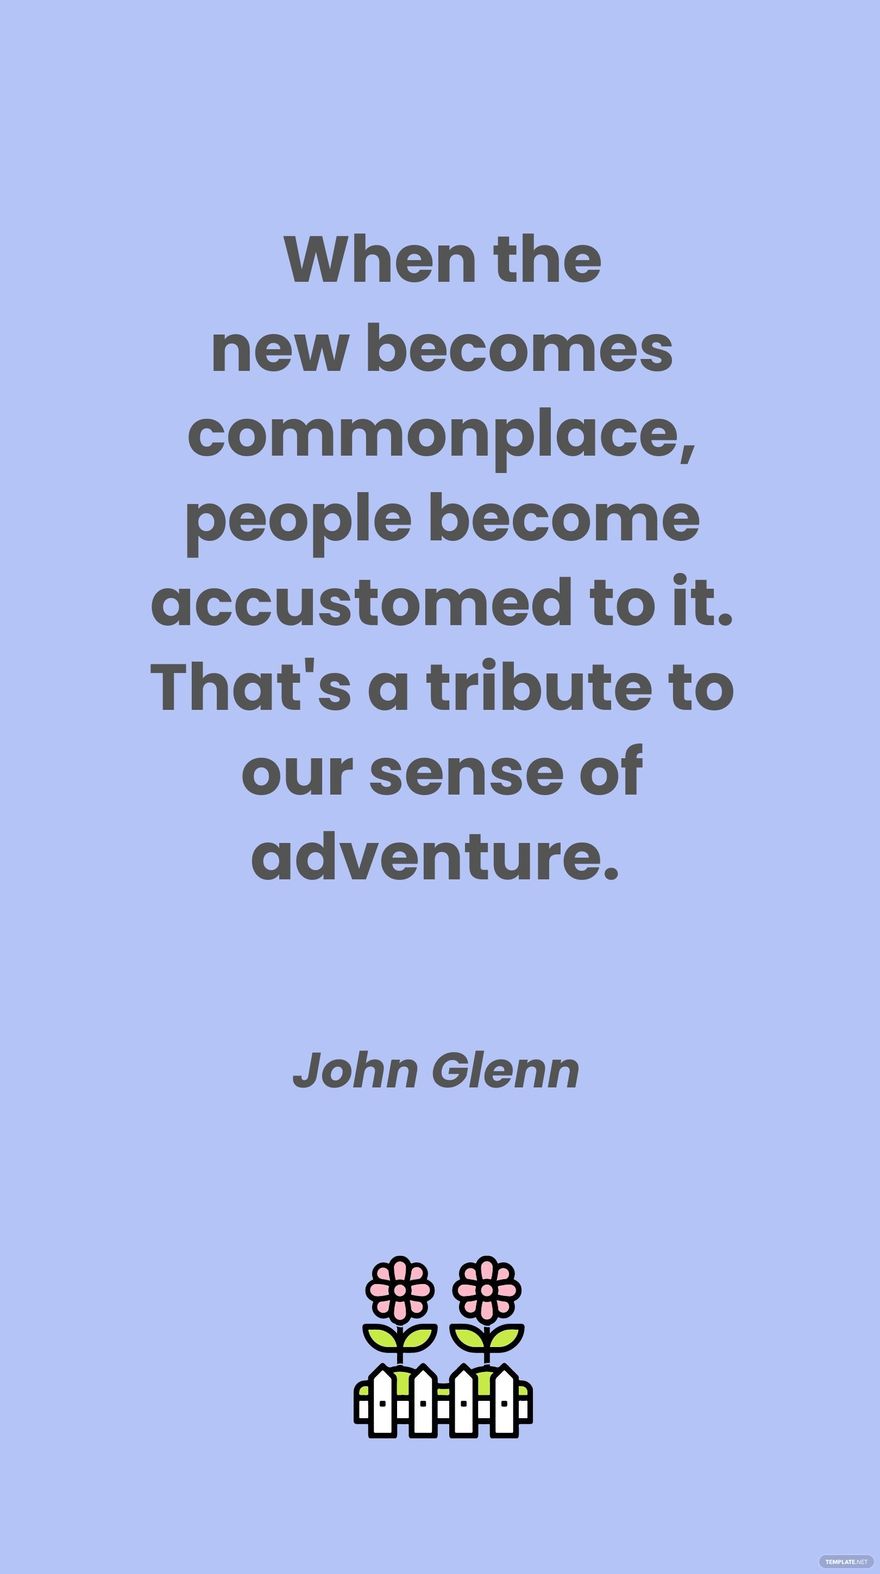 John Glenn - When the new becomes commonplace, people become accustomed to it. That's a tribute to our sense of adventure. in JPG